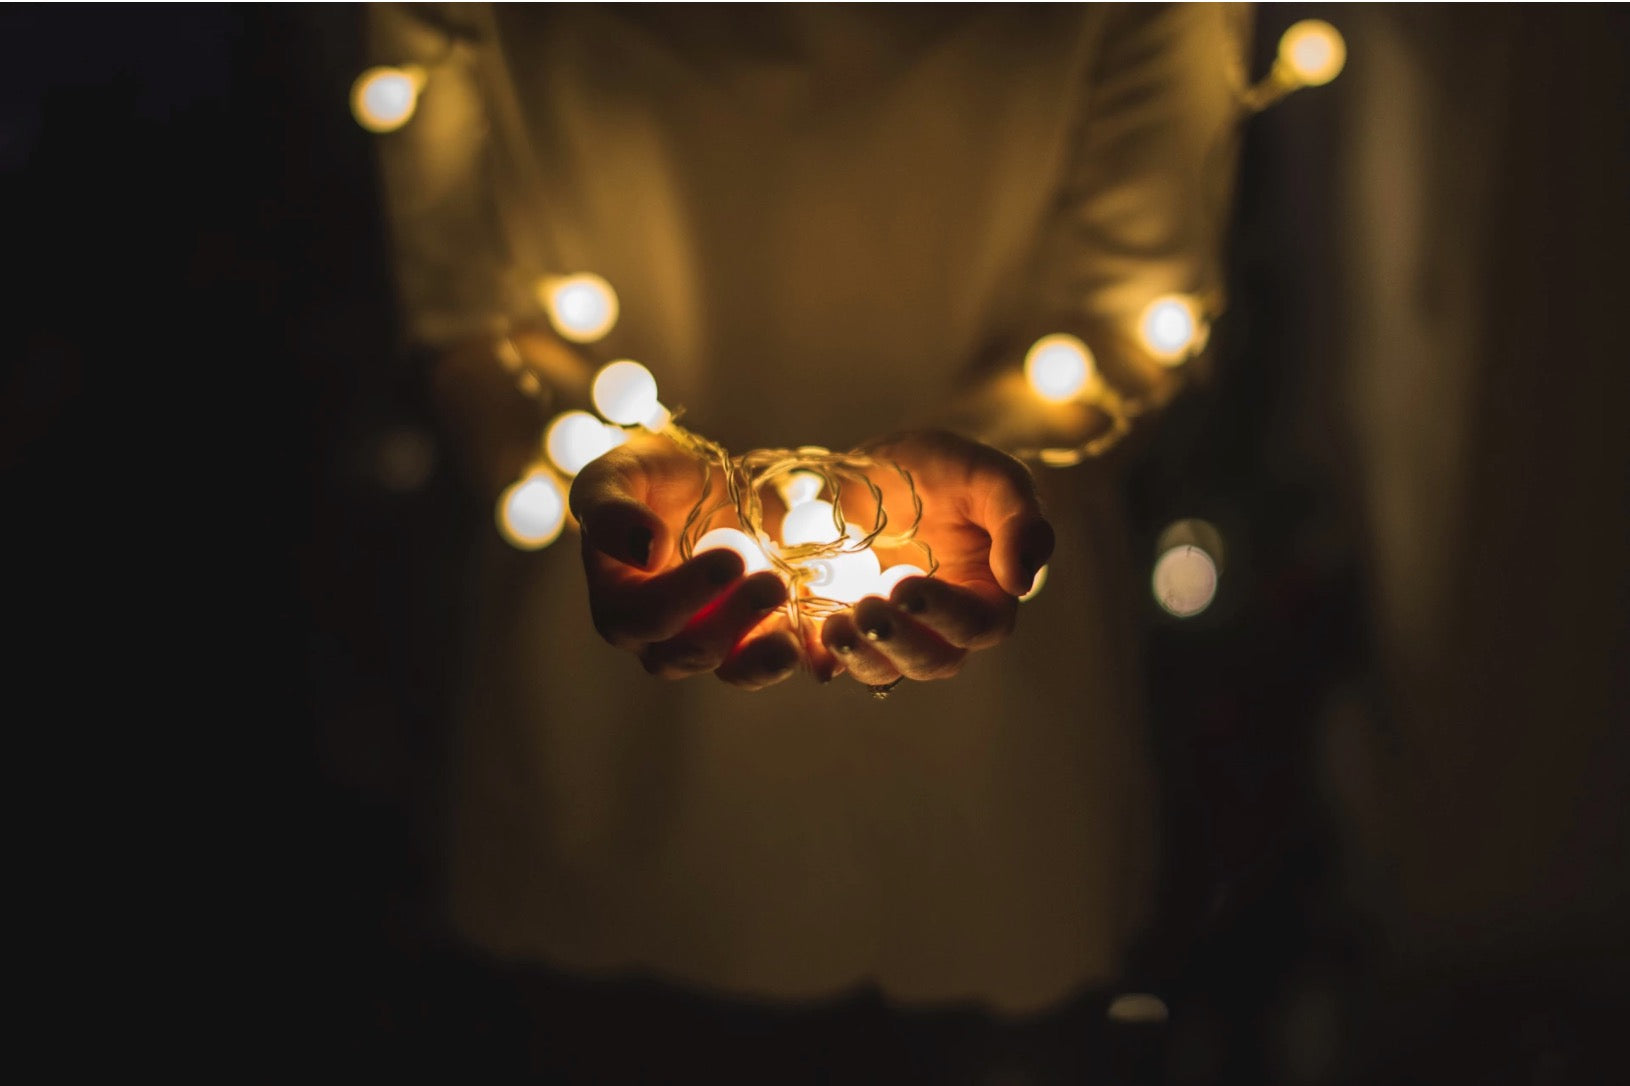 5 Tips For Managing Holiday Stress With Holistic Nourishment - By Sophie Knapp MScN